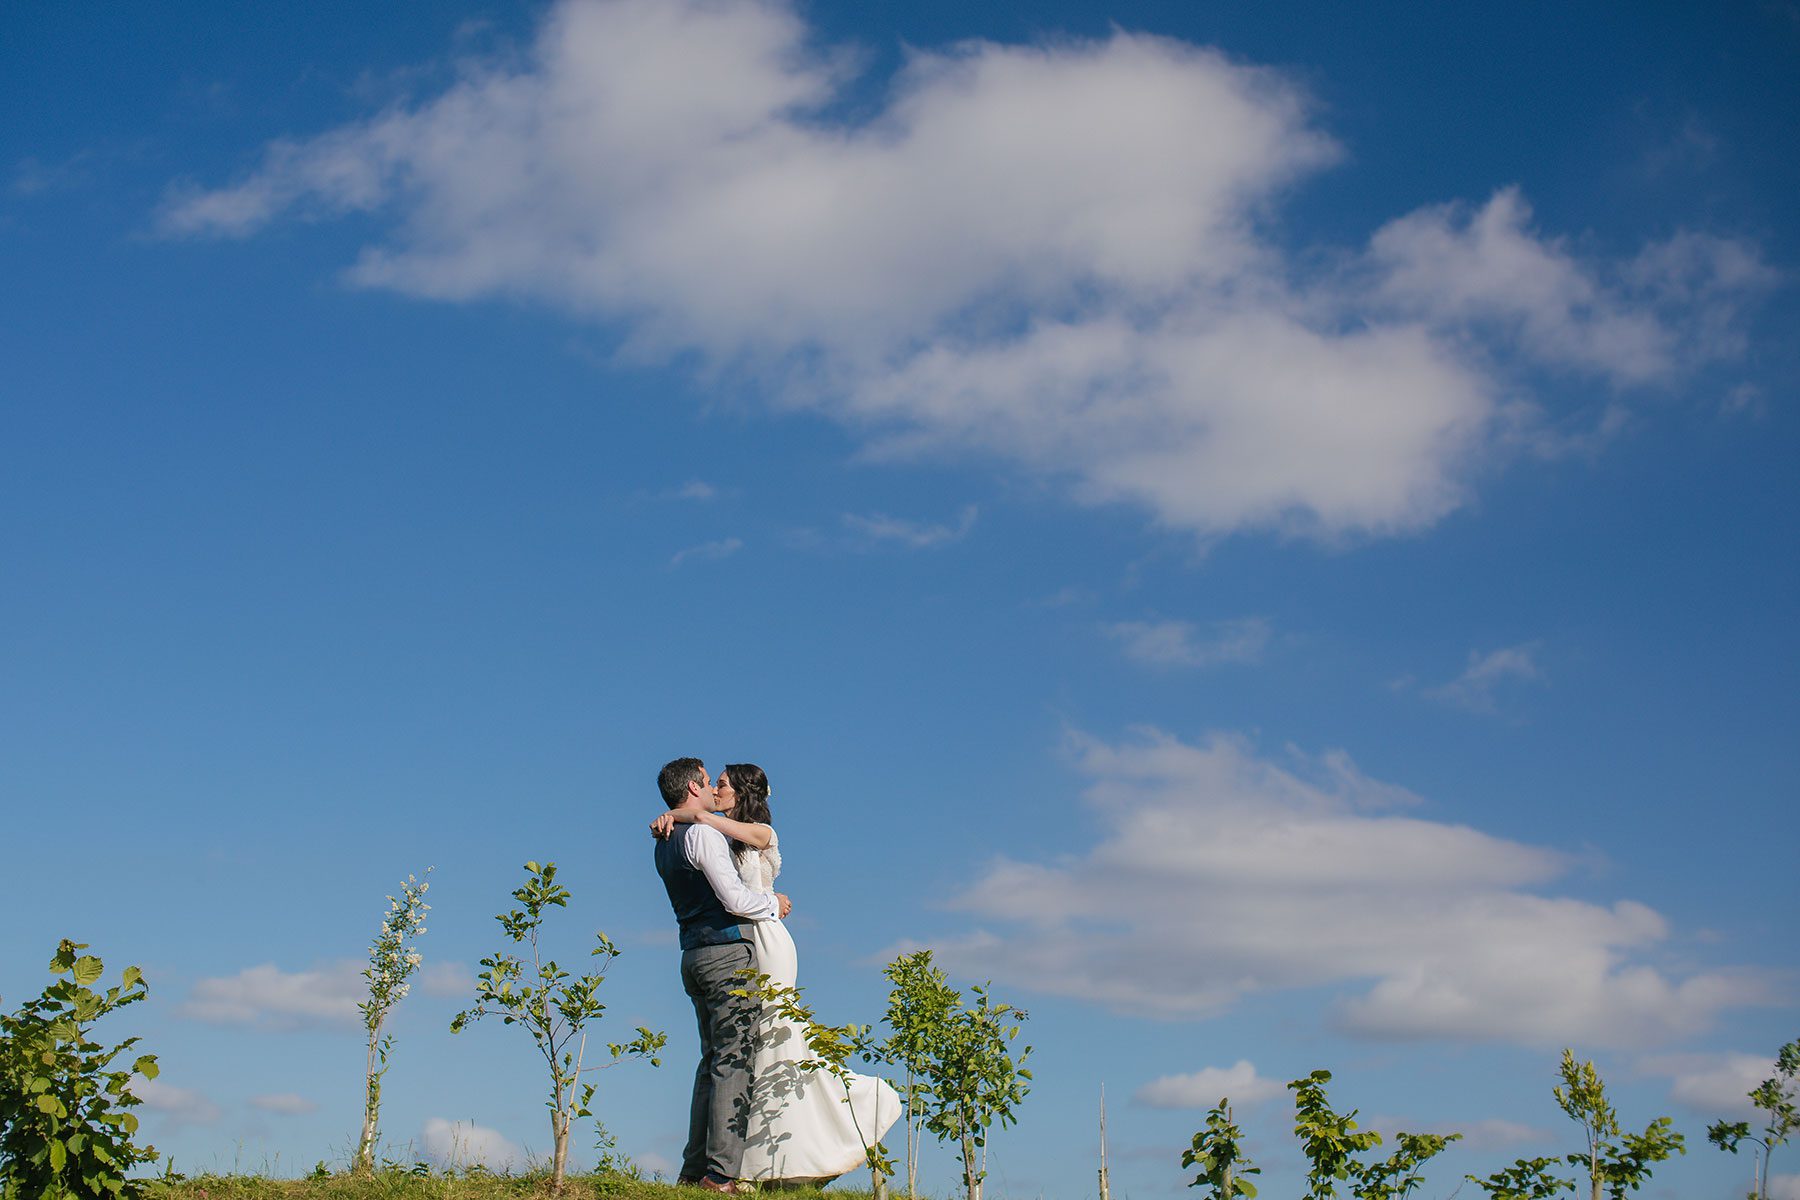 On the hill - Reportage Wedding Photography in Cheltenham | Bullit Photography